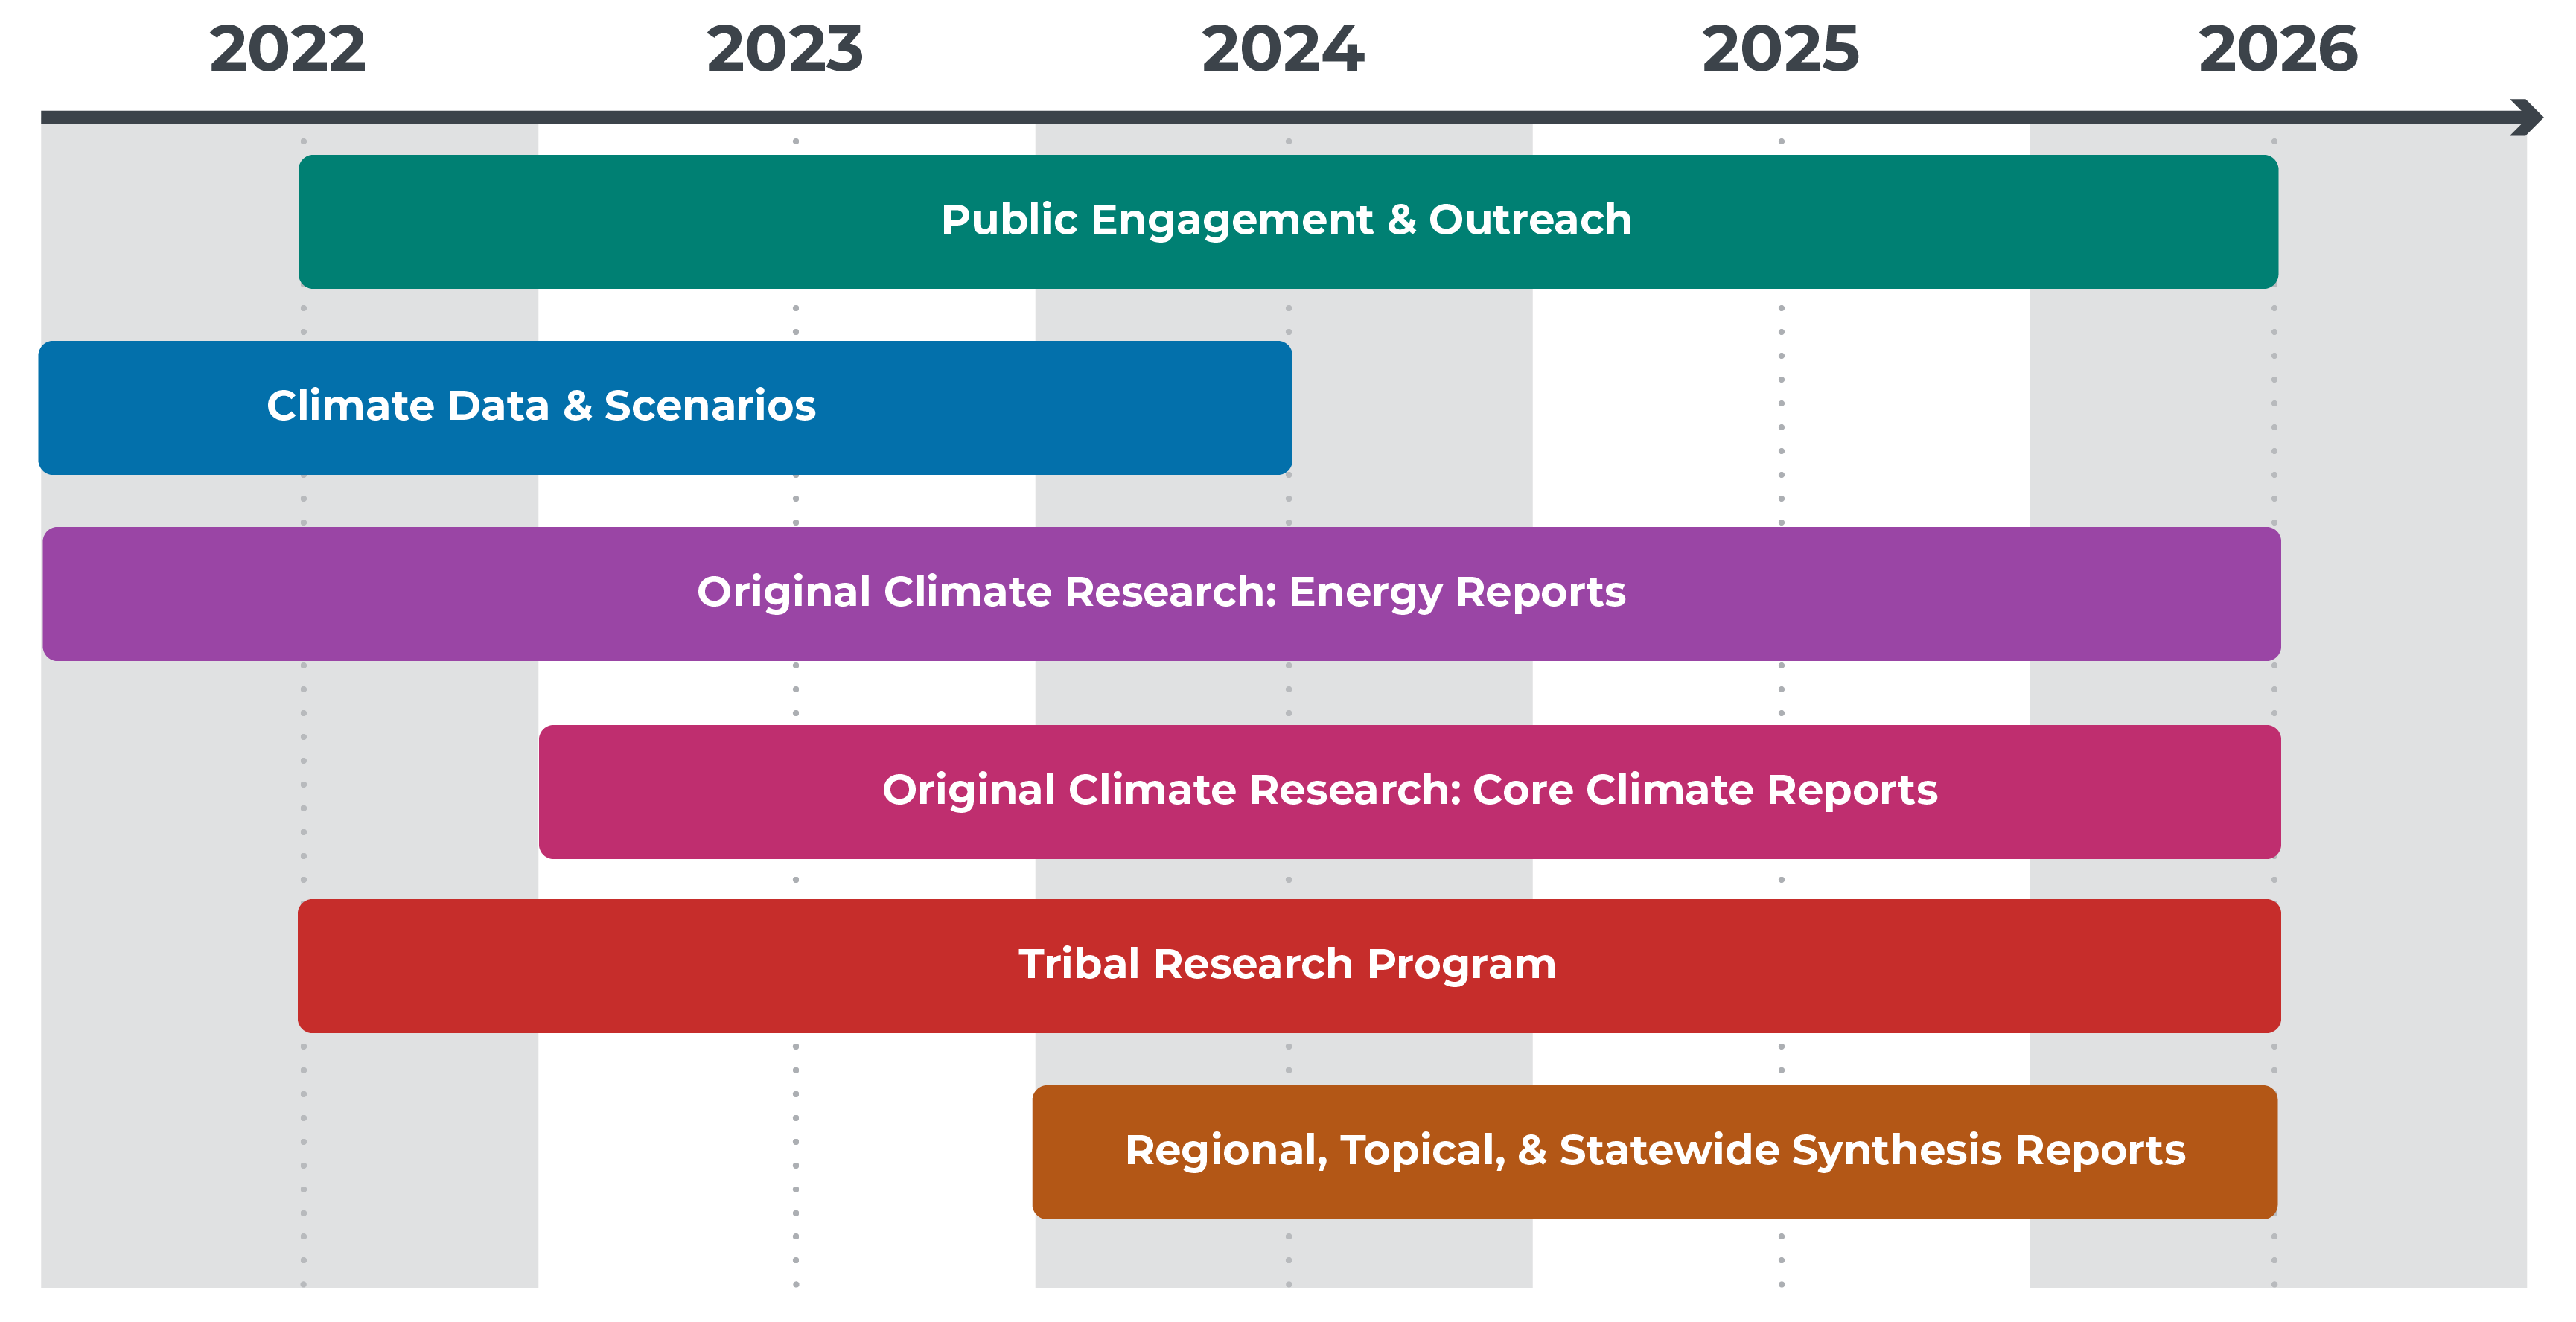 Graphic showing engagement timeline. Climate date scenarios from 2022 to mid 2024. Original Climate Research: Energy Reports from 2022 to mid 2026. Original Climate Research: Core Climate Reports from 2023 to mid 2026. Tribal research program from mid 2022 to mid 2026. Regional, topical, and statewide synthesis reports from 2024 to mid 2026.